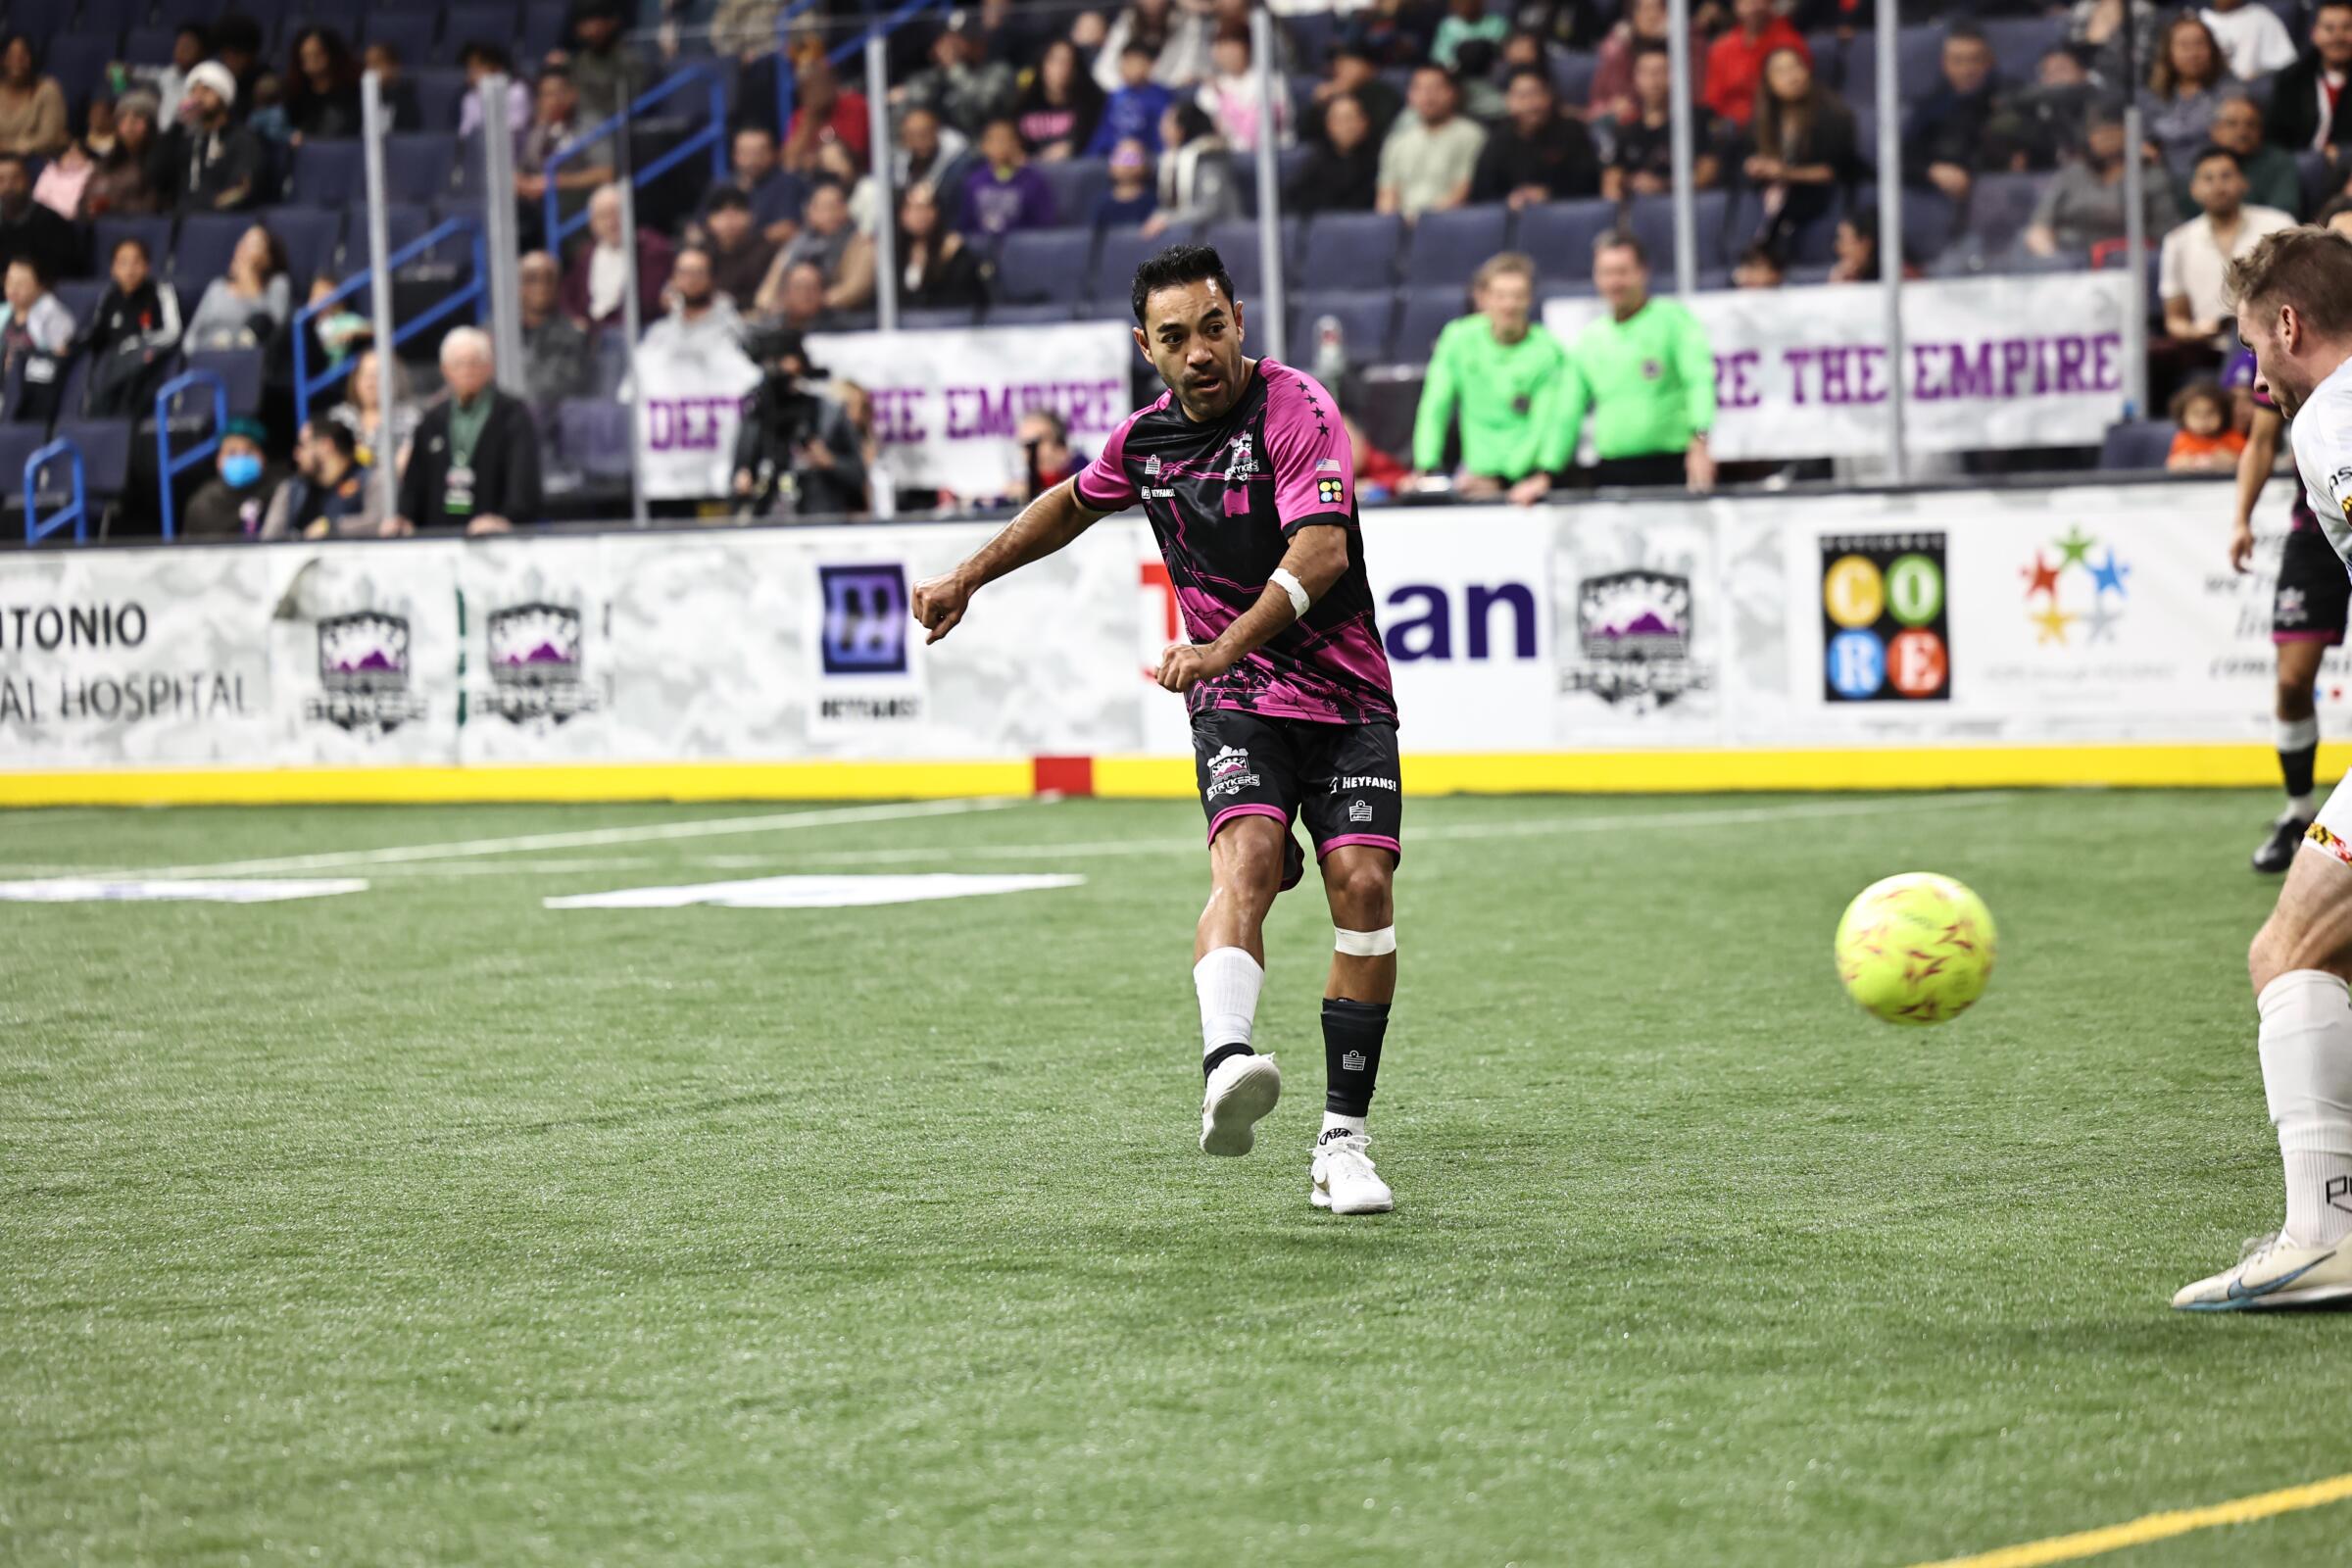 Empire Strykers midfielder Marco Fabian takes a shot during a match against the Baltimore Blast last month.